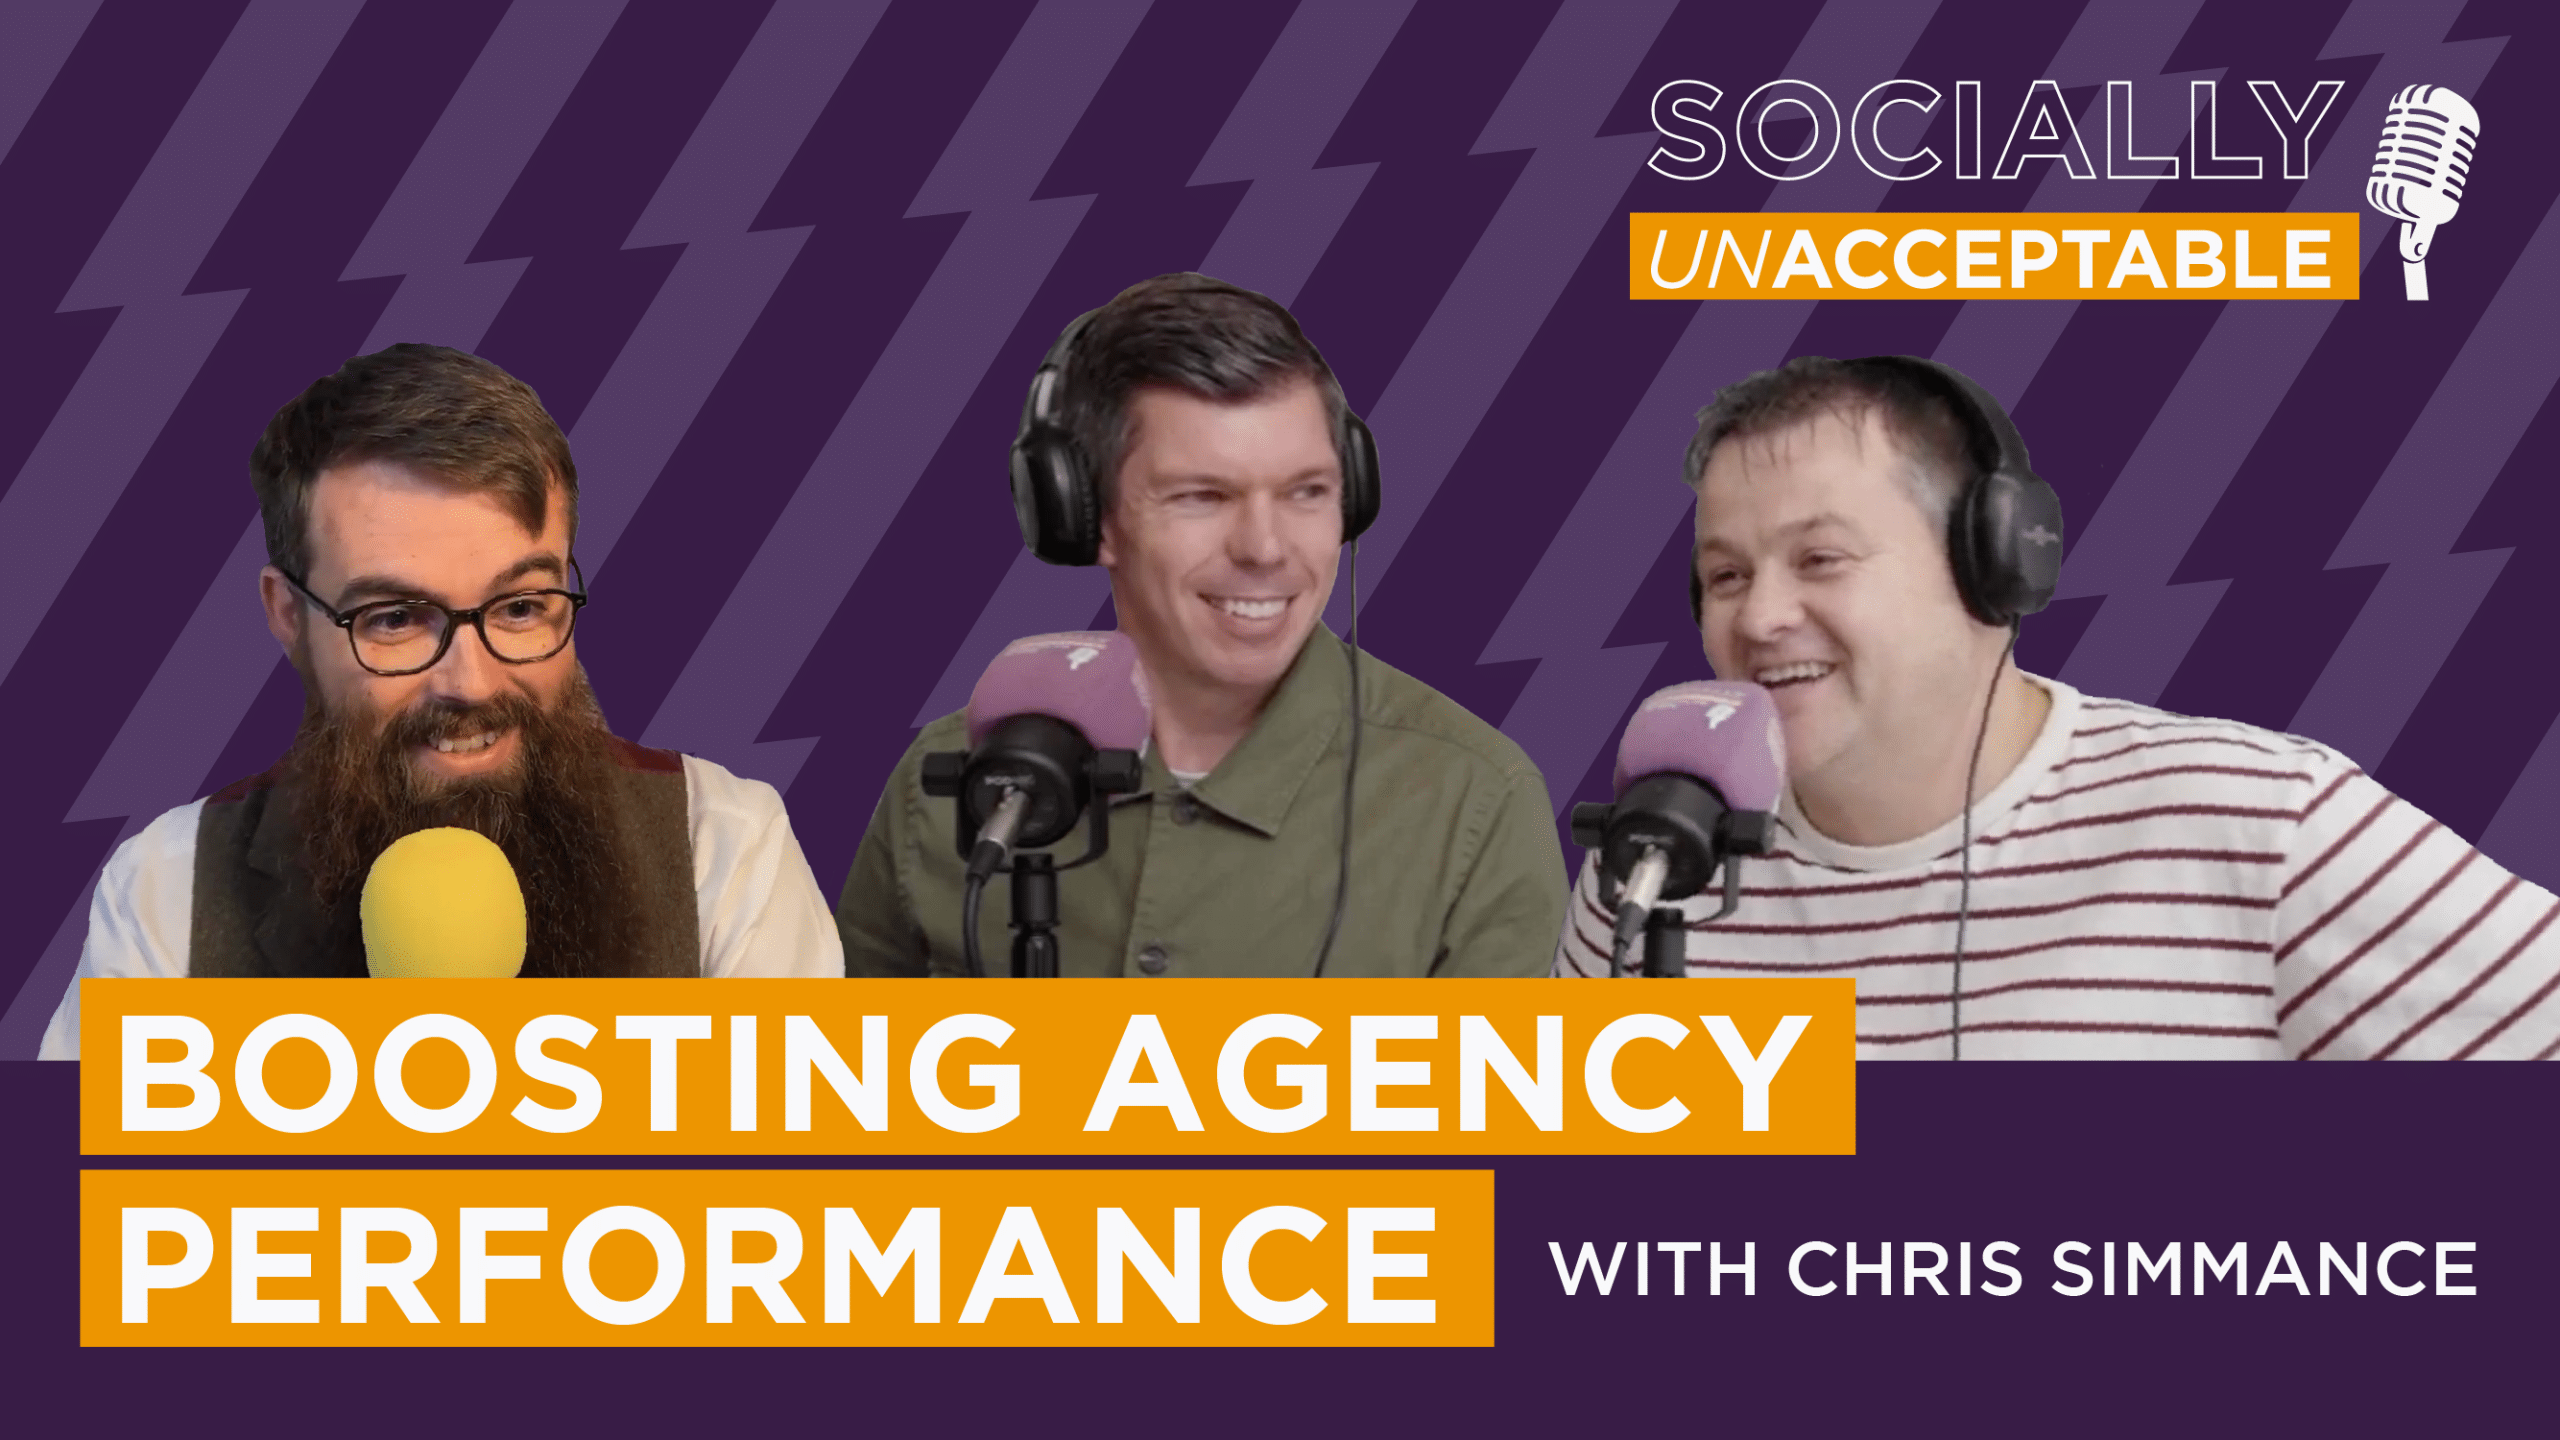 Boosting Agency Performance With Founder of OMG Center, Chris Simmance